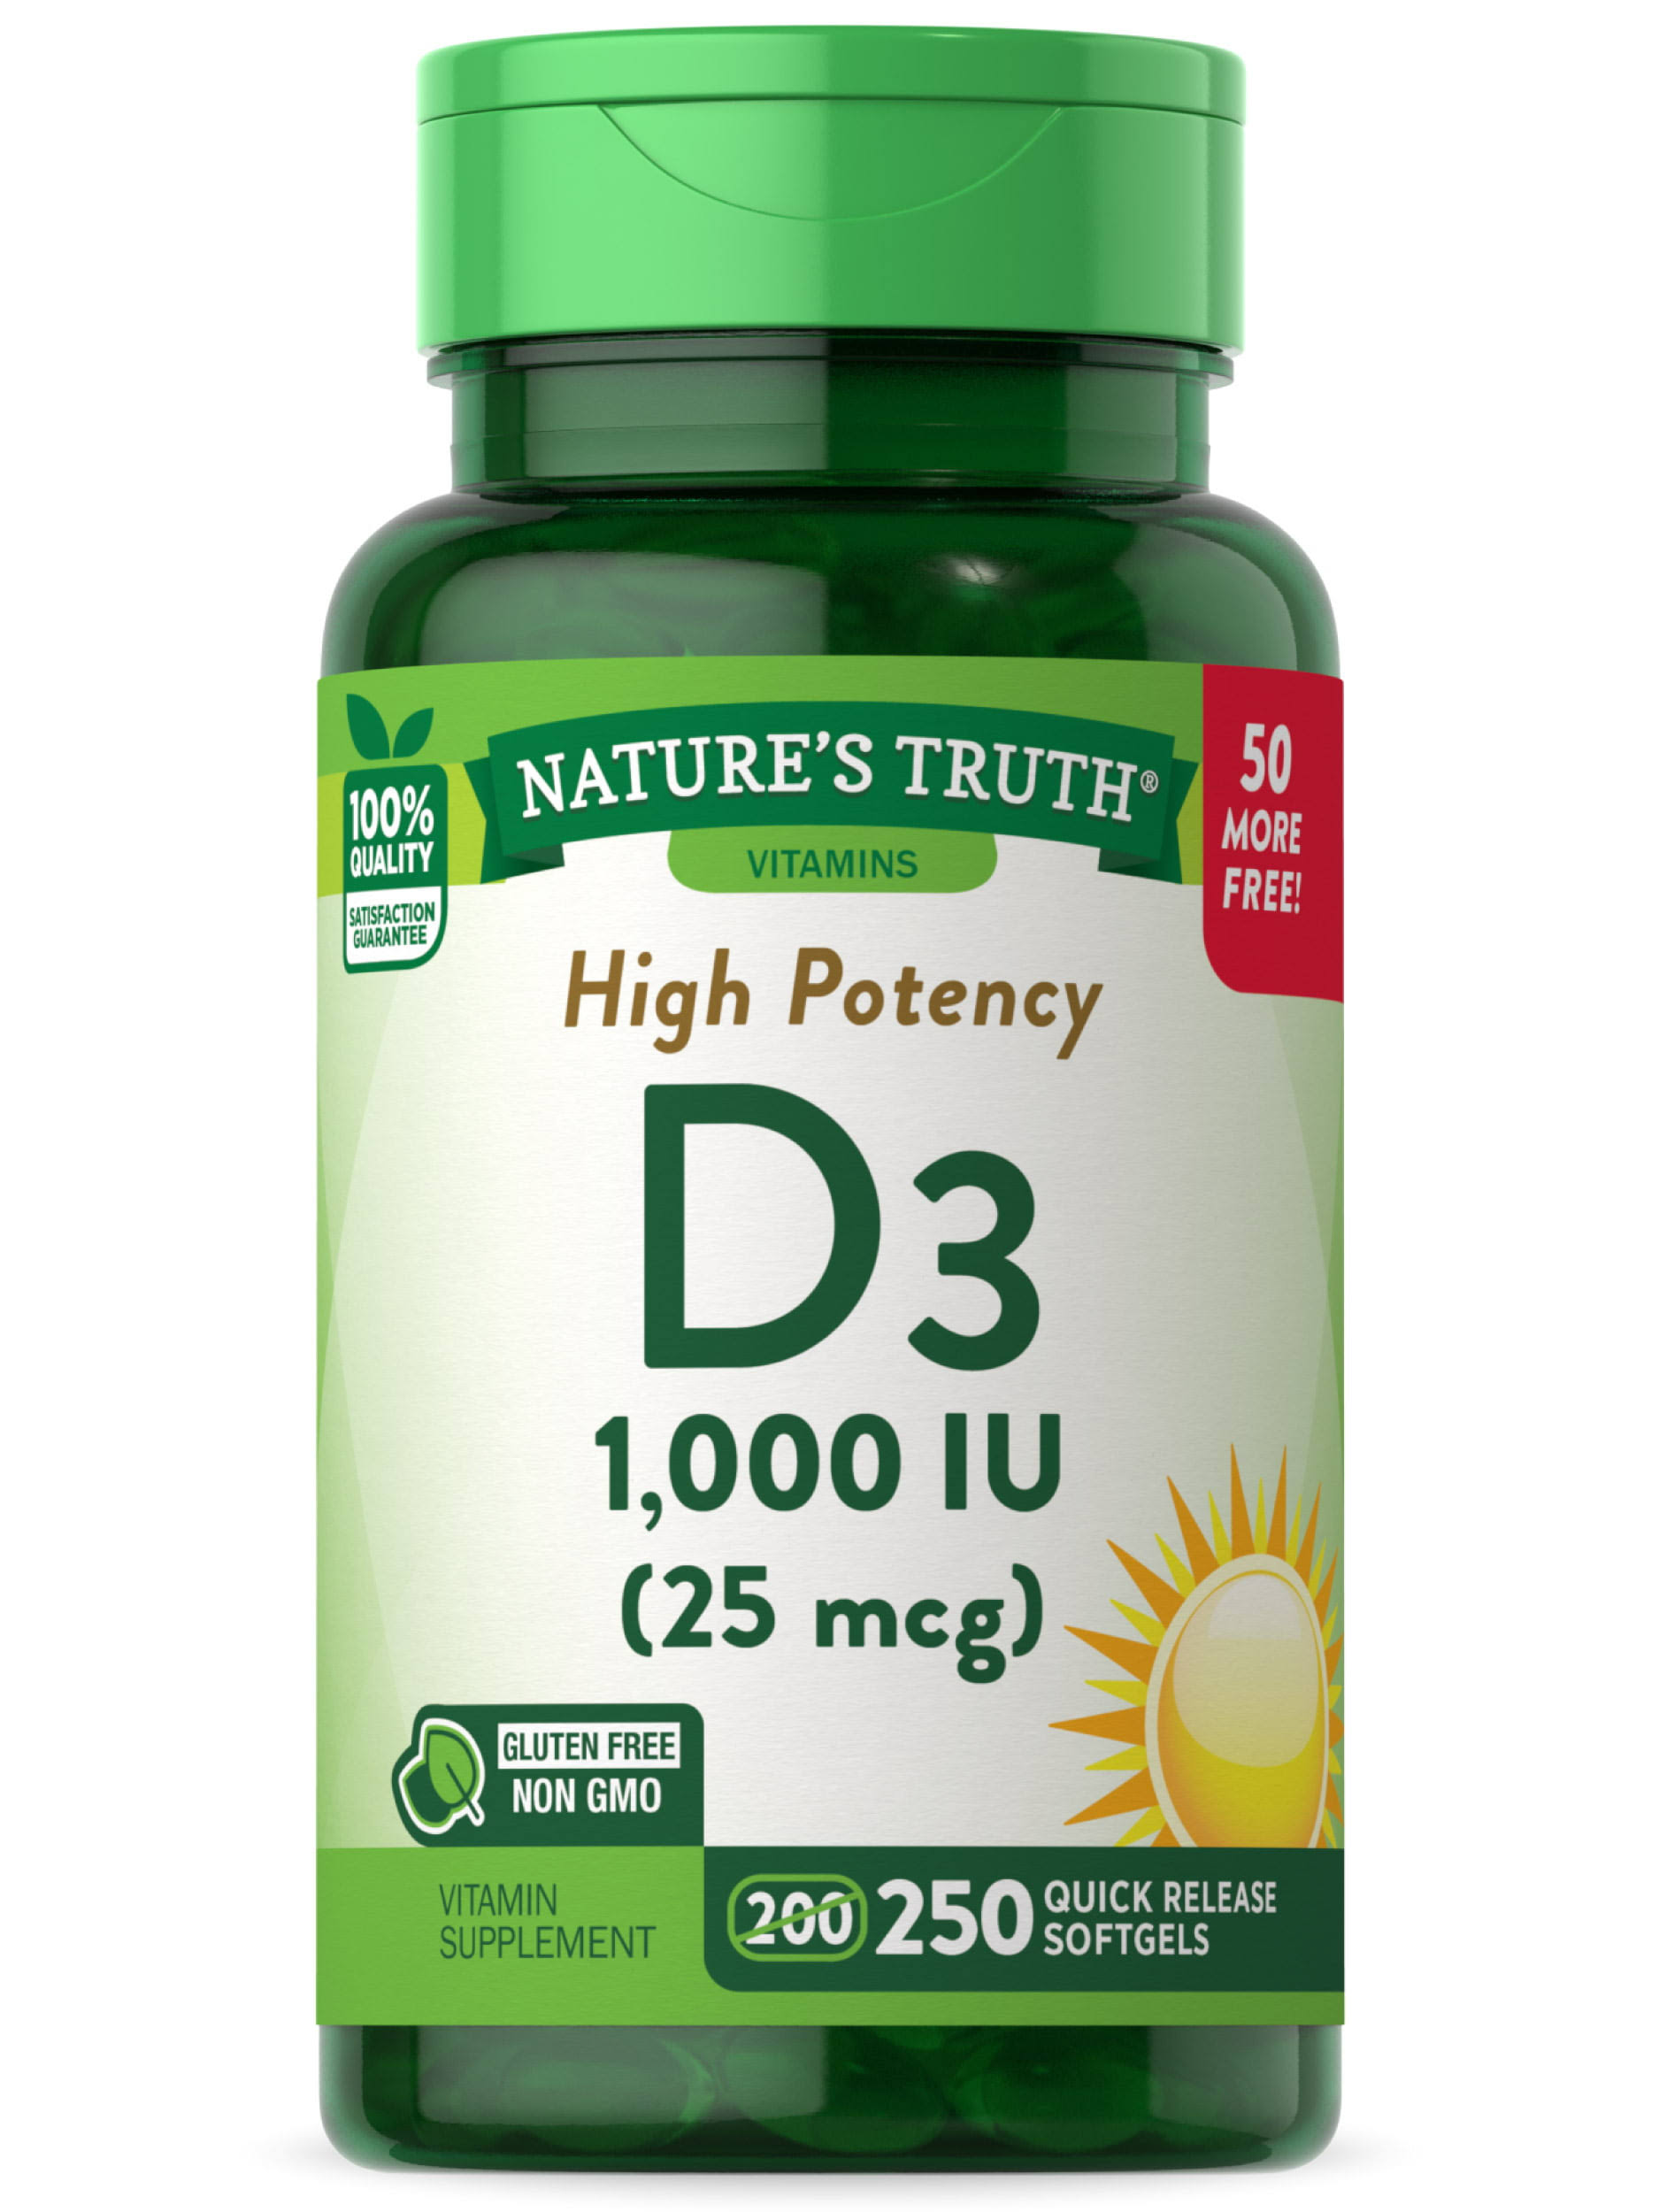 Nature's Truth Vitamin D3, 1,000 IU, Value Size, 200+50 Count